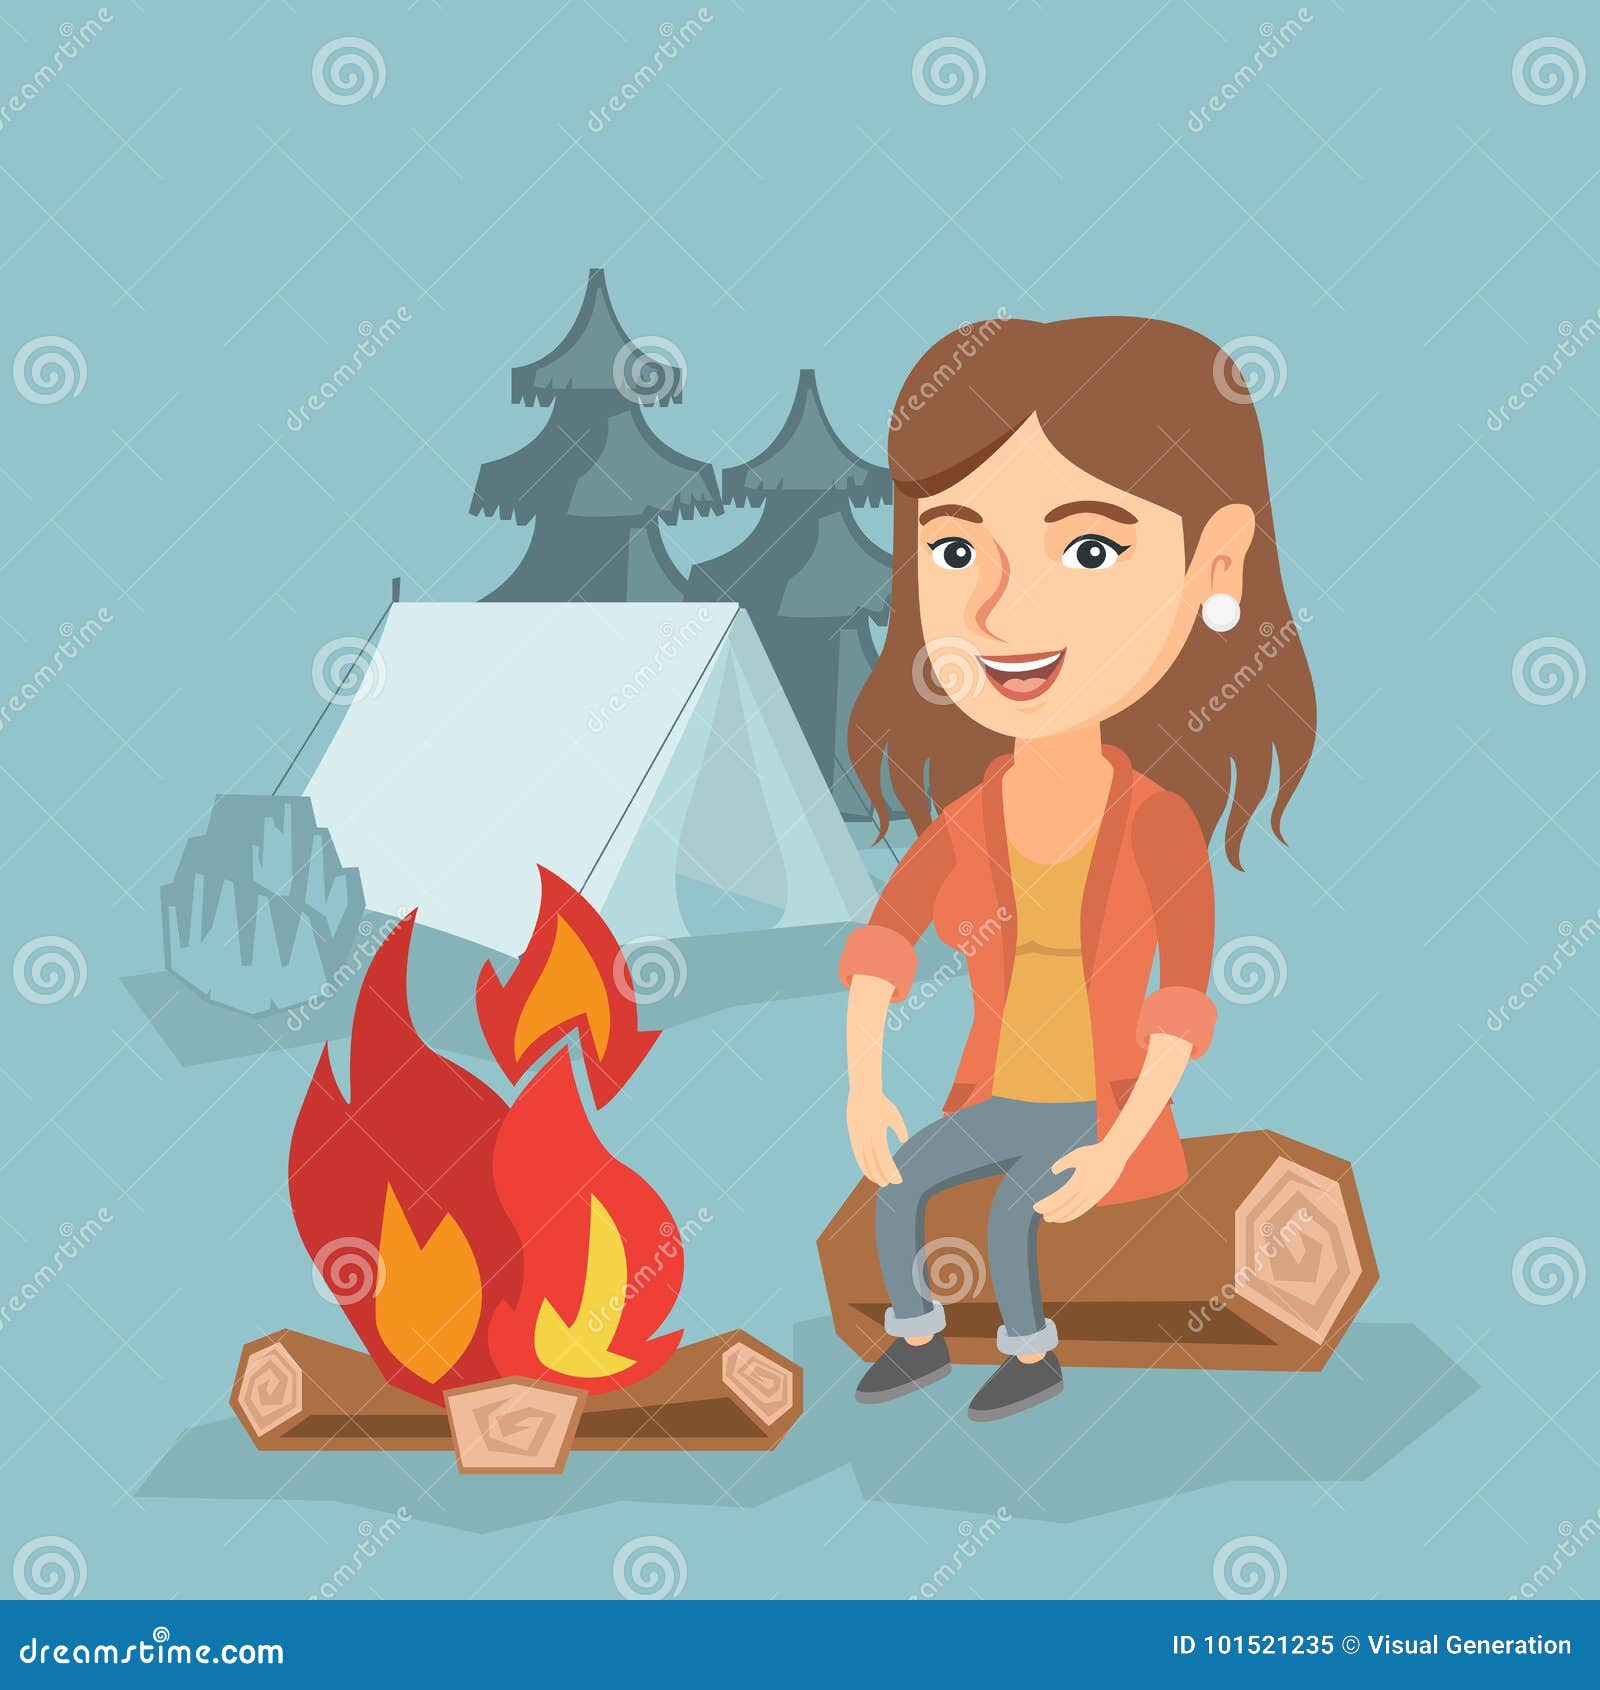 Woman Sitting On Log Near Campfire In The Camping. Stock ...